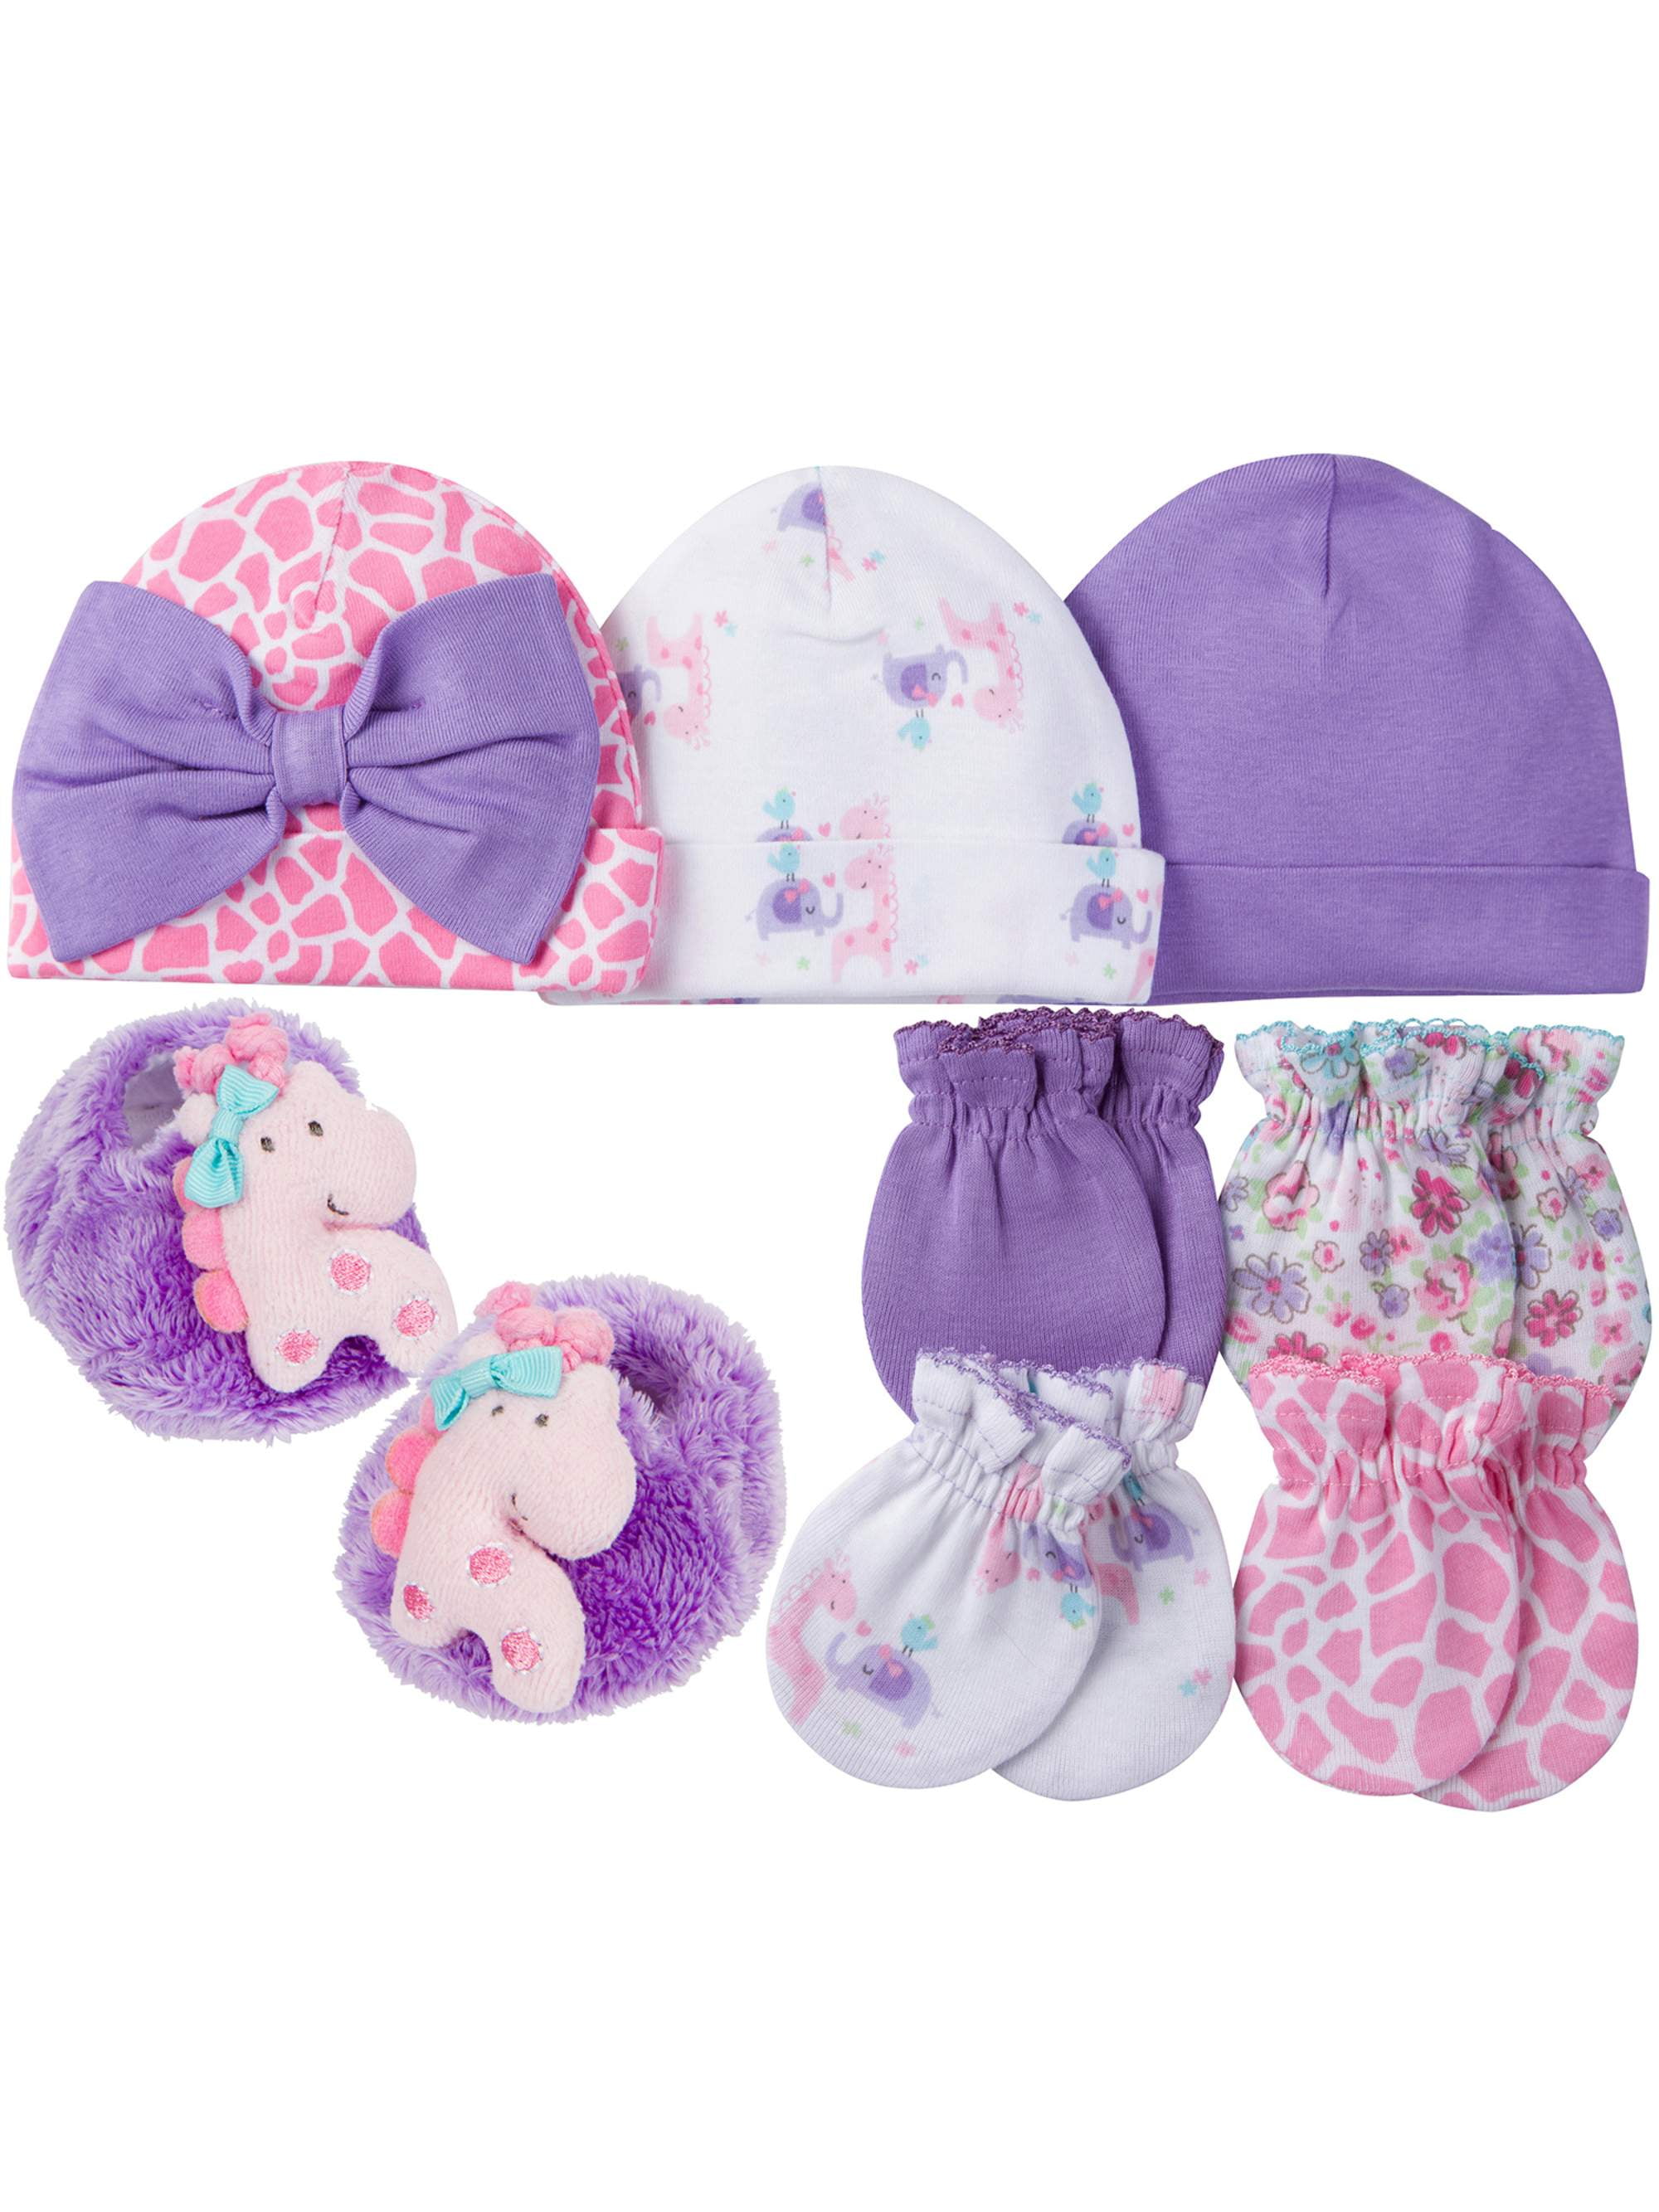 3 Piece Baby Boy Girl 100% Cotton Hat Mittens and Booties Set Hospital Gift Set 